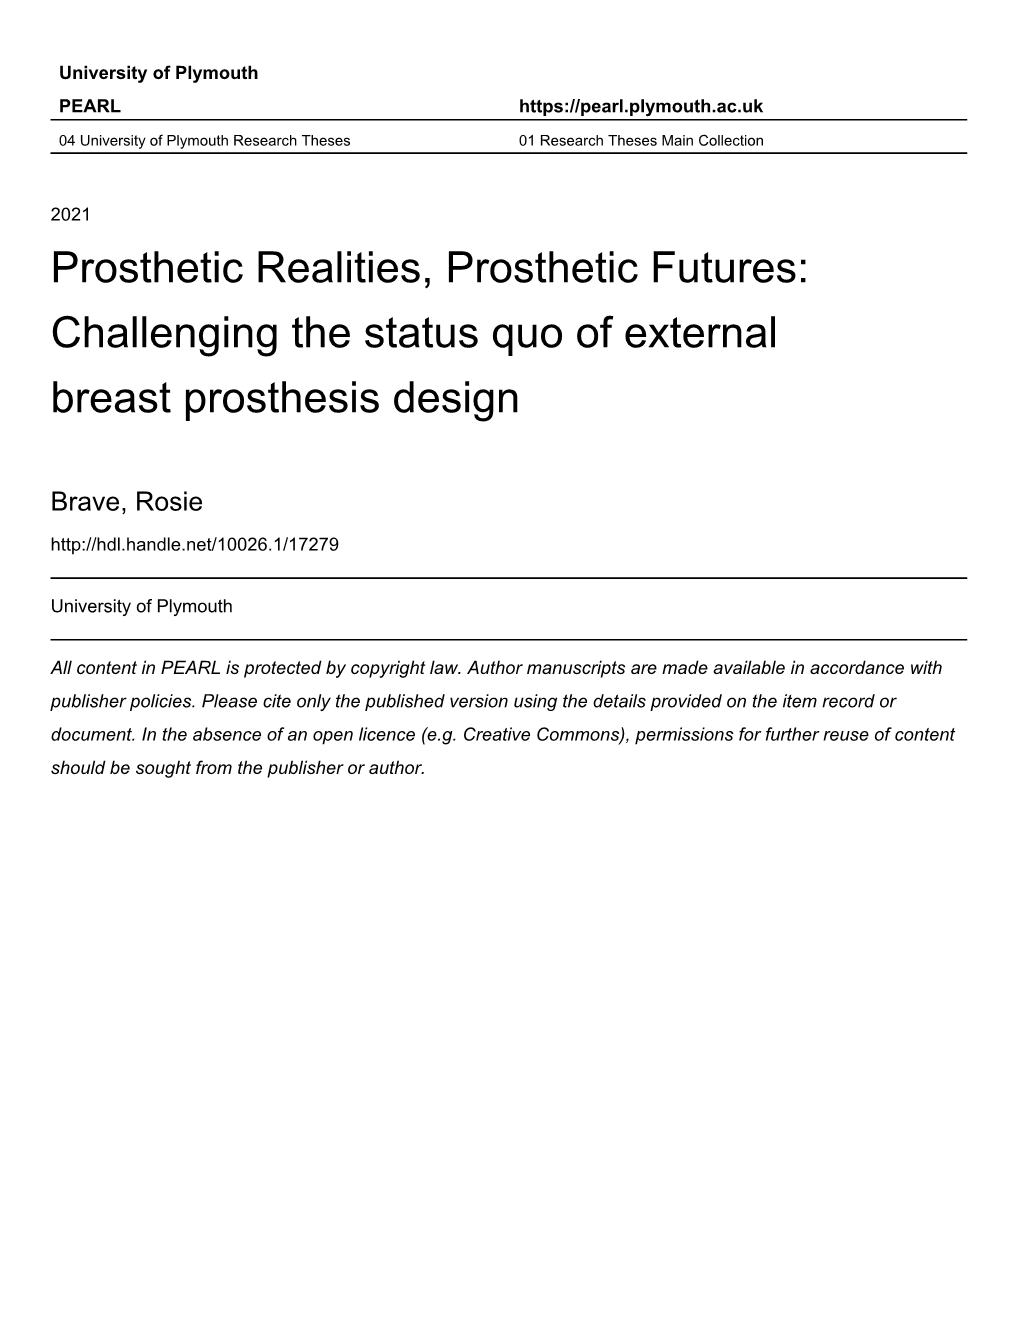 Prosthetic Realities, Prosthetic Futures: Challenging the Status Quo of External Breast Prosthesis Design